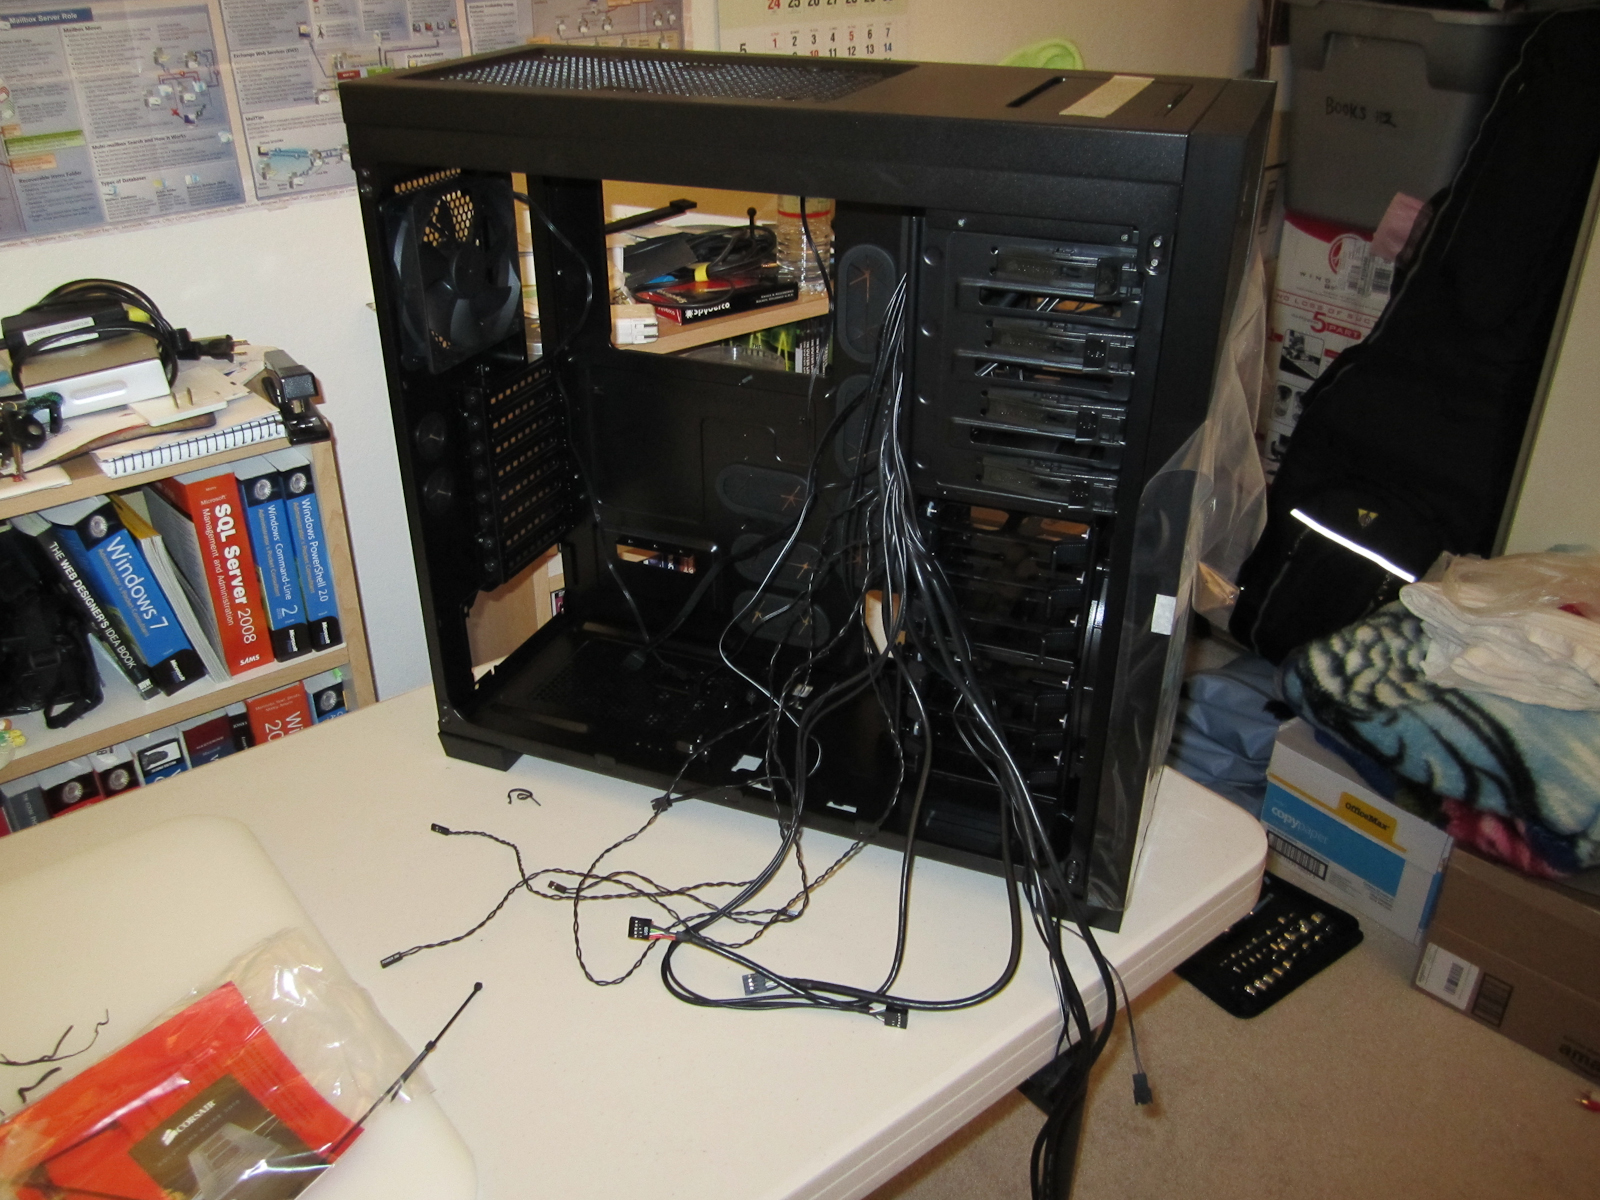 a computer case has cables plugged into it